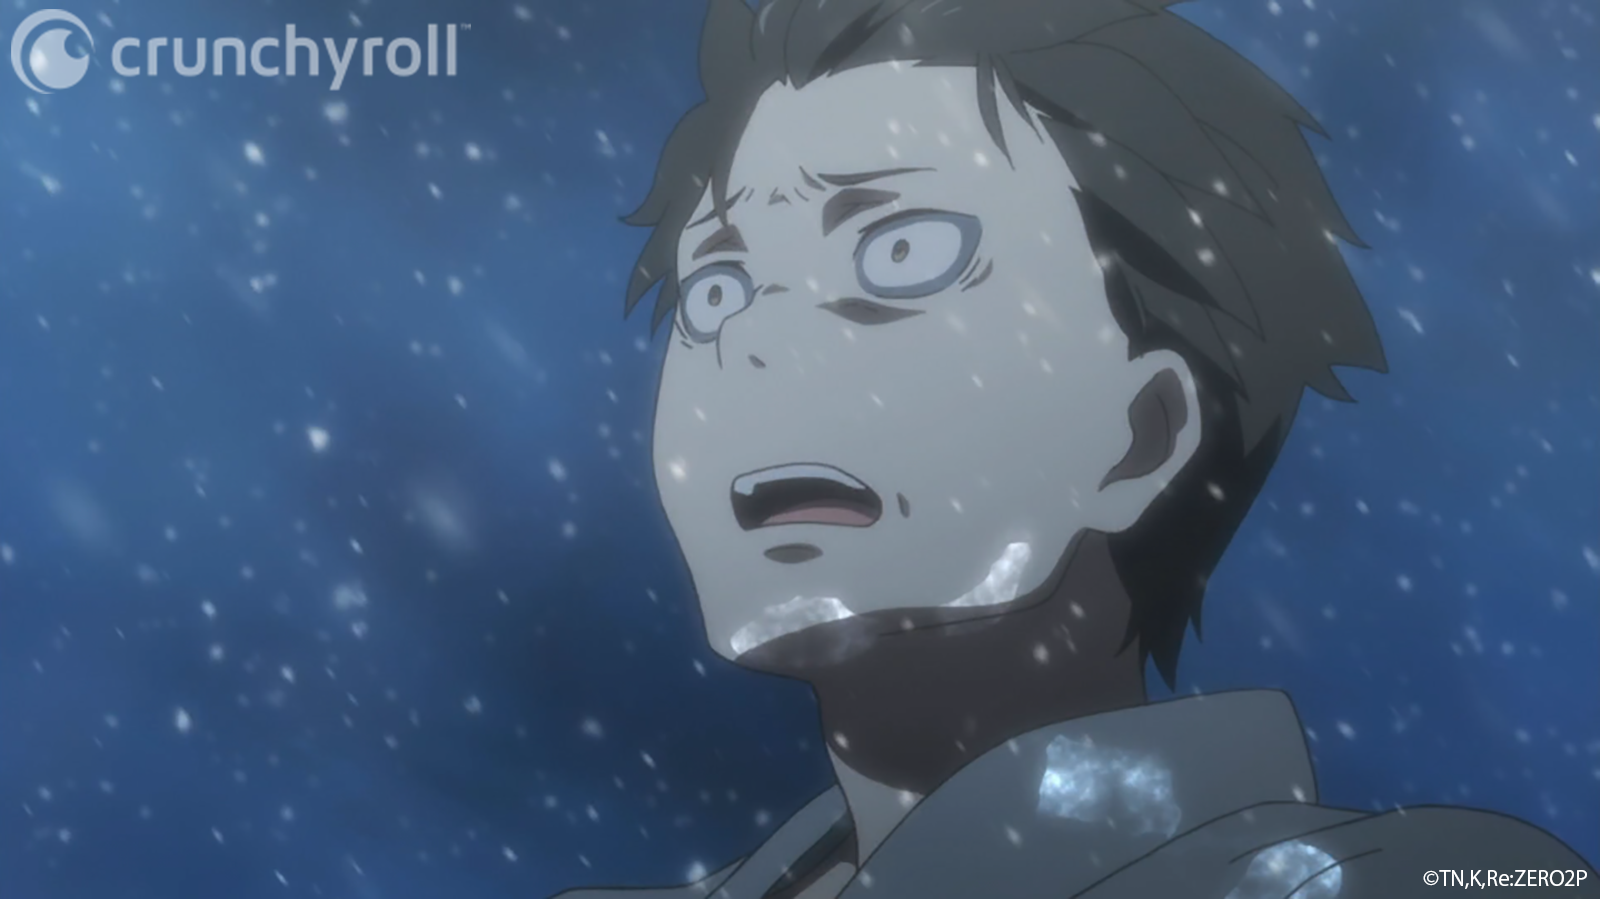 Natsuki Subaru begins to freeze solid beneath the icy wrath of Puck in a scene from the Re: ZERO -Starting Life in Another World- TV anime.